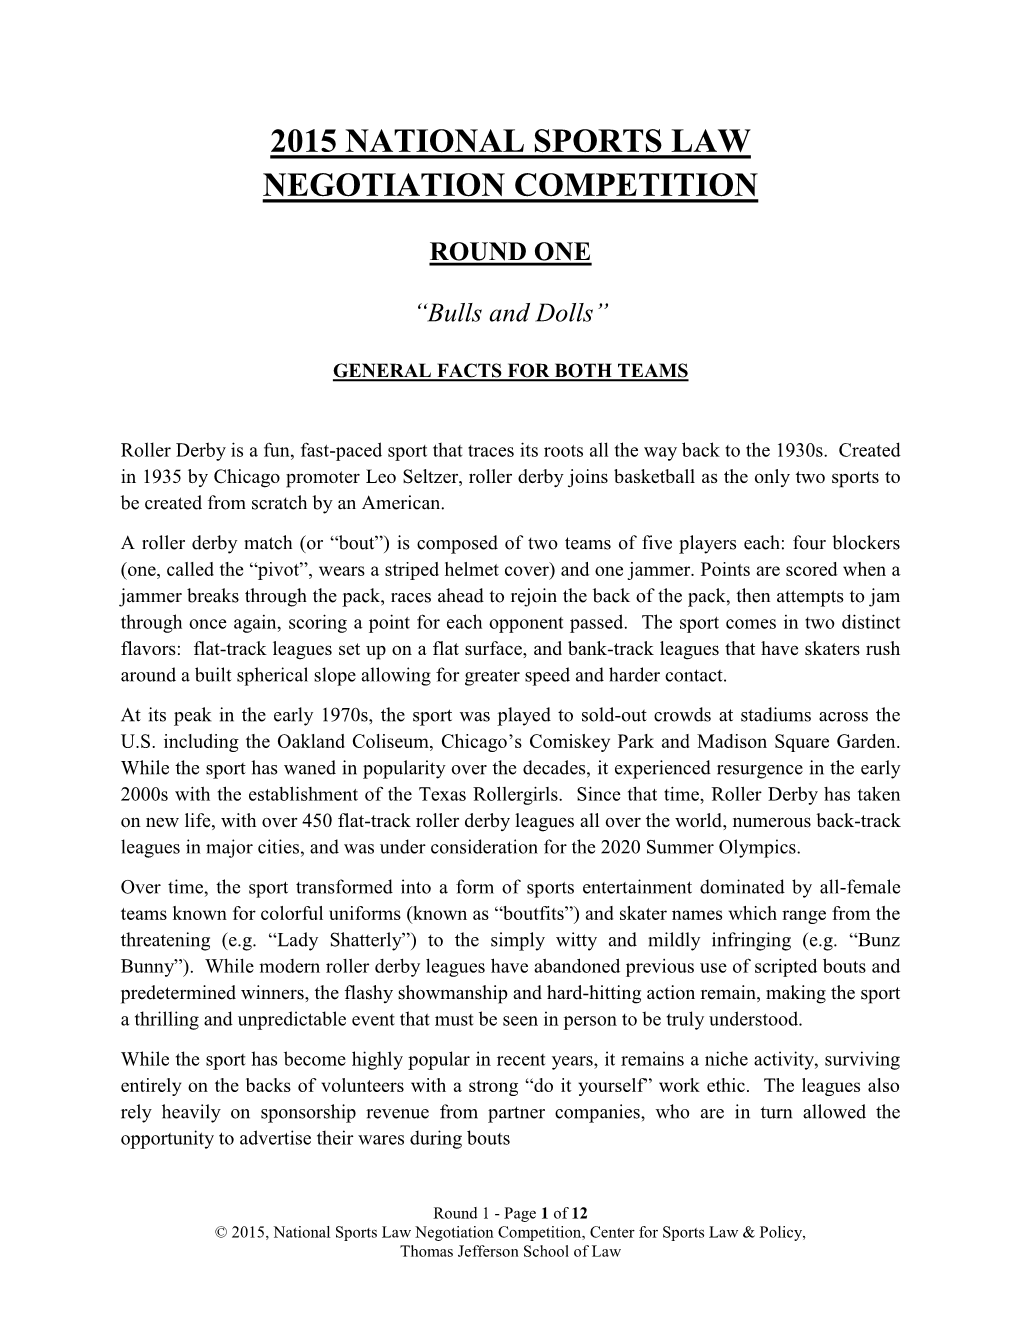 2015 National Sports Law Negotiation Competition